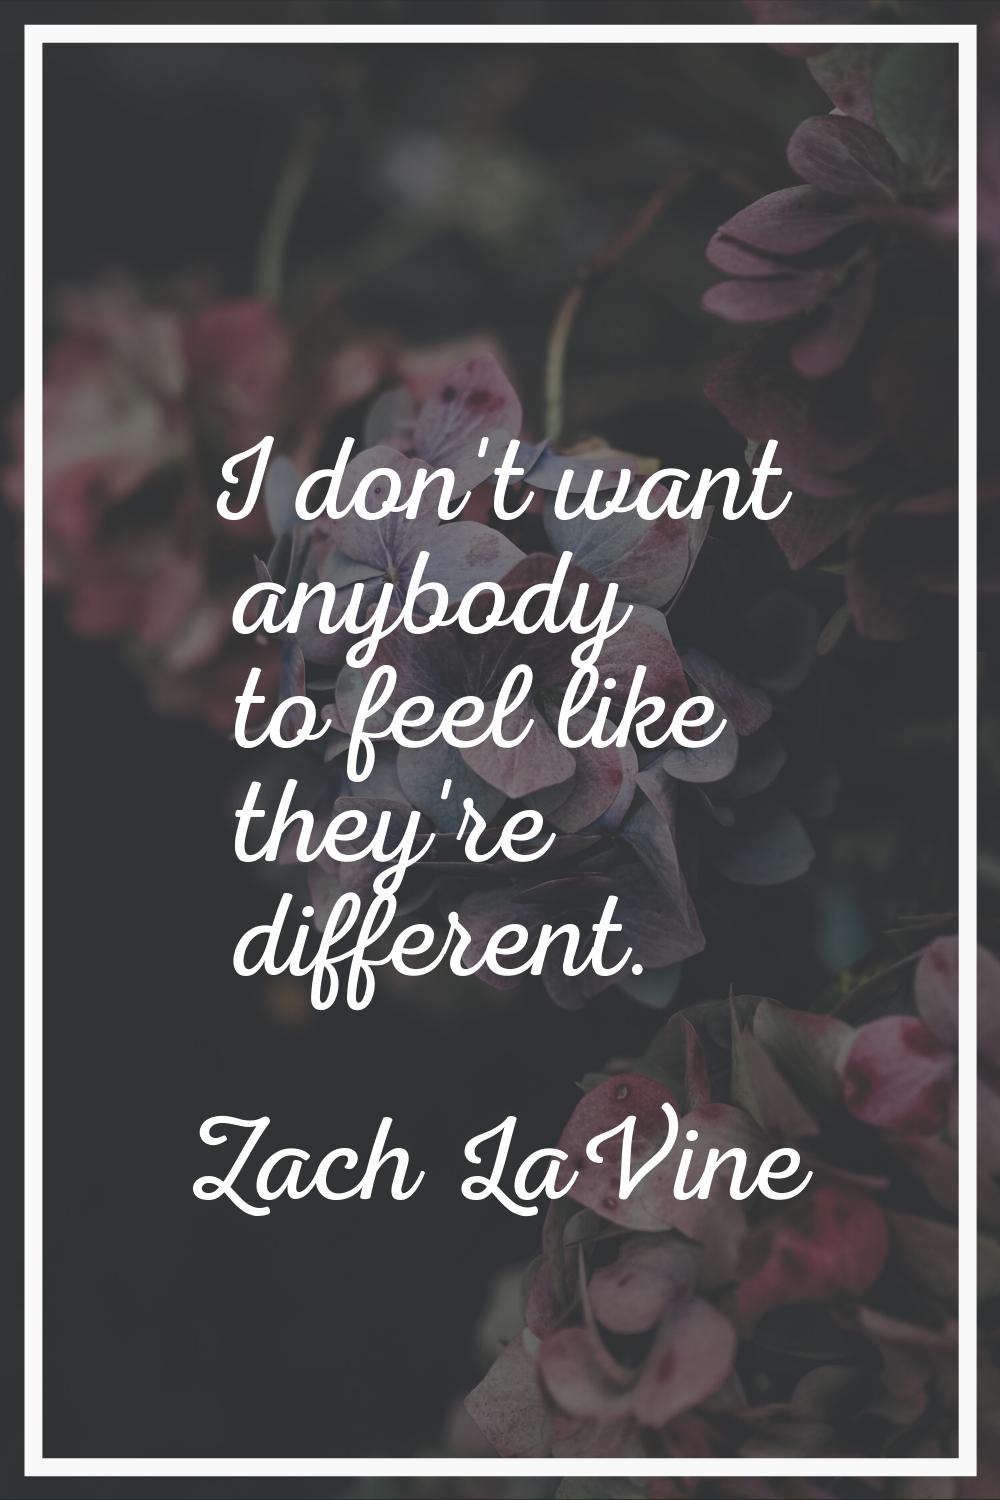 I don't want anybody to feel like they're different.